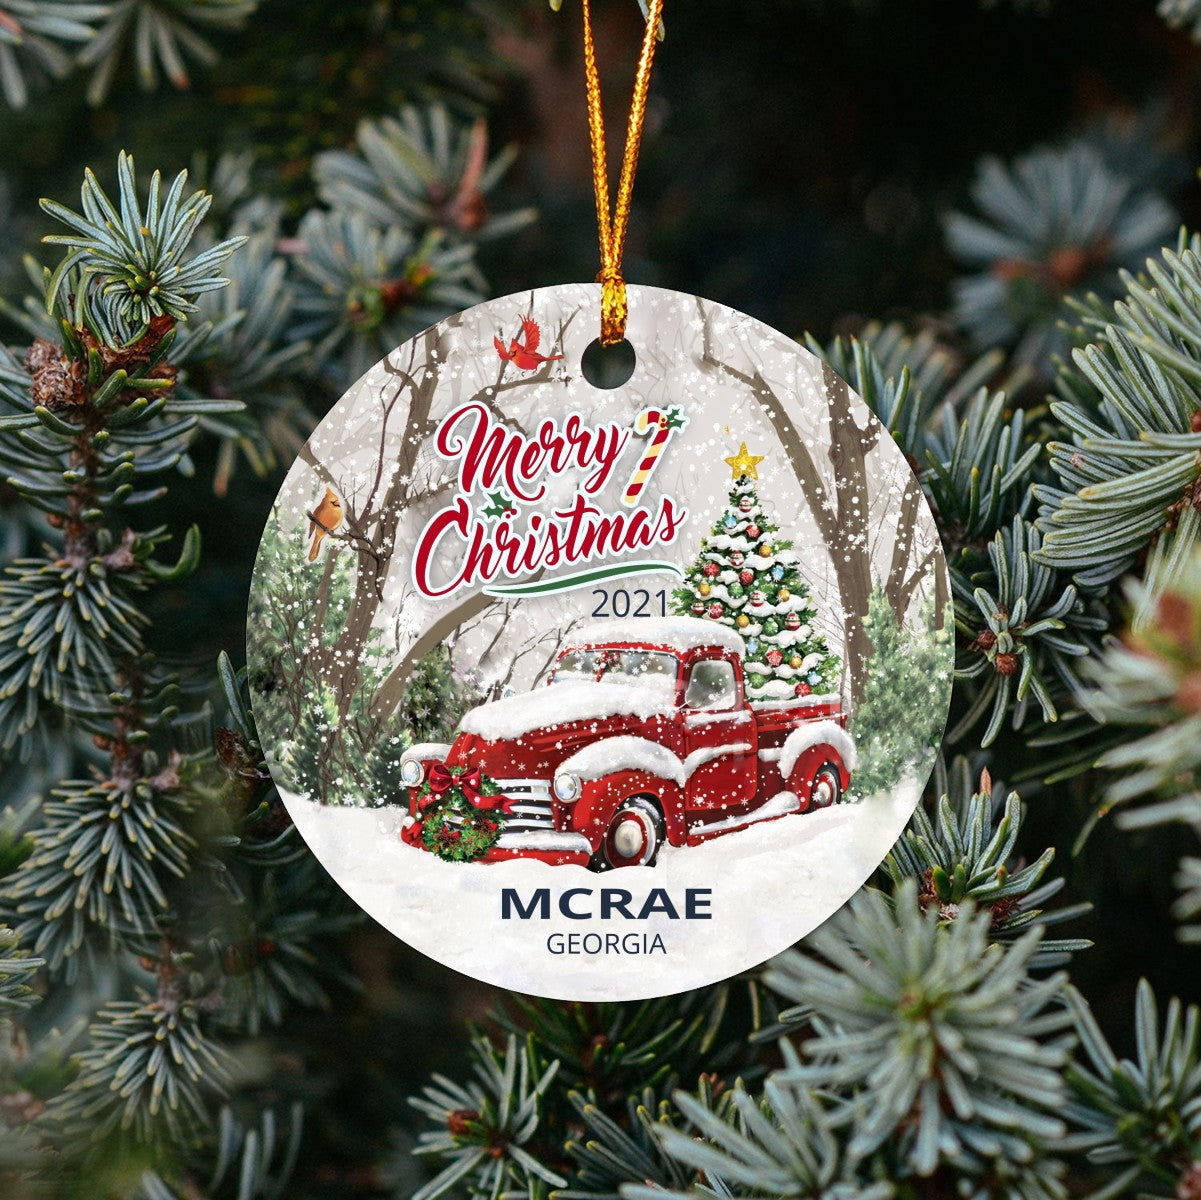 Christmas Tree Ornaments McRae - Ornament With Name City, State McRae Georgia GA Ornament - Red Truck Xmas Ornaments 3'' Plastic Gift For Family, Friend And Housewarming